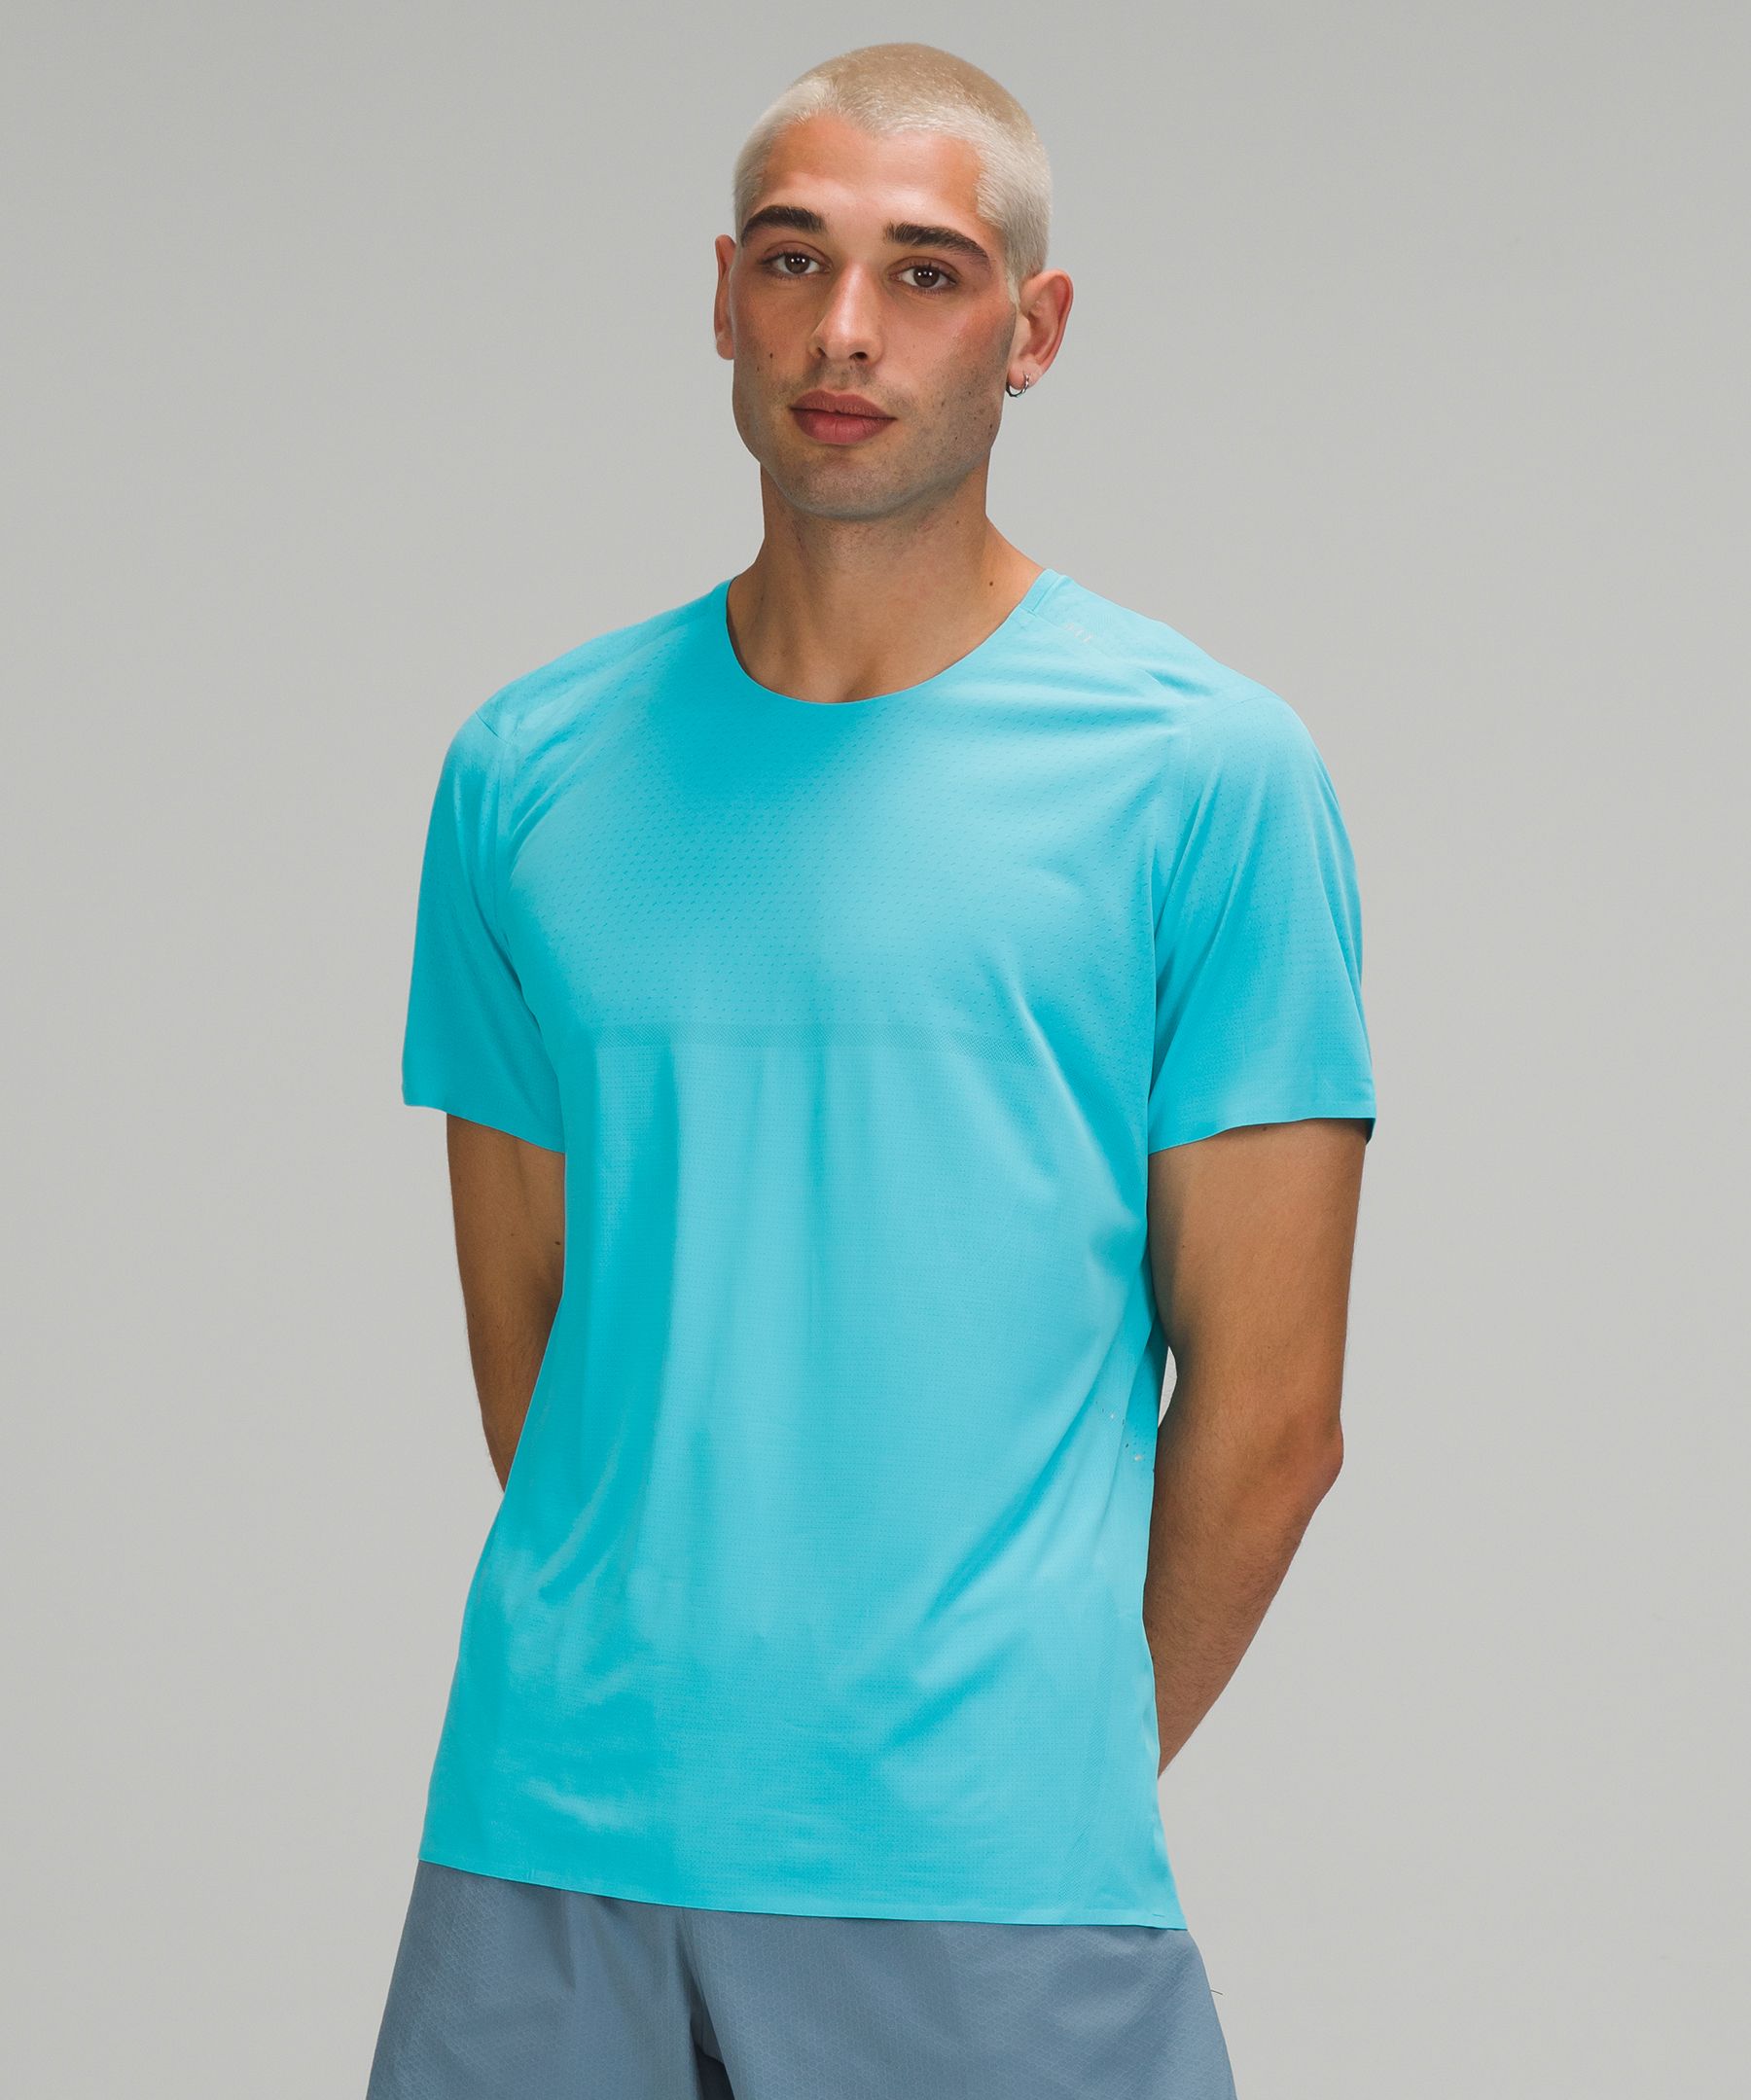 Lululemon Fast And Free Short Sleeve Shirt In Electric Turquoise